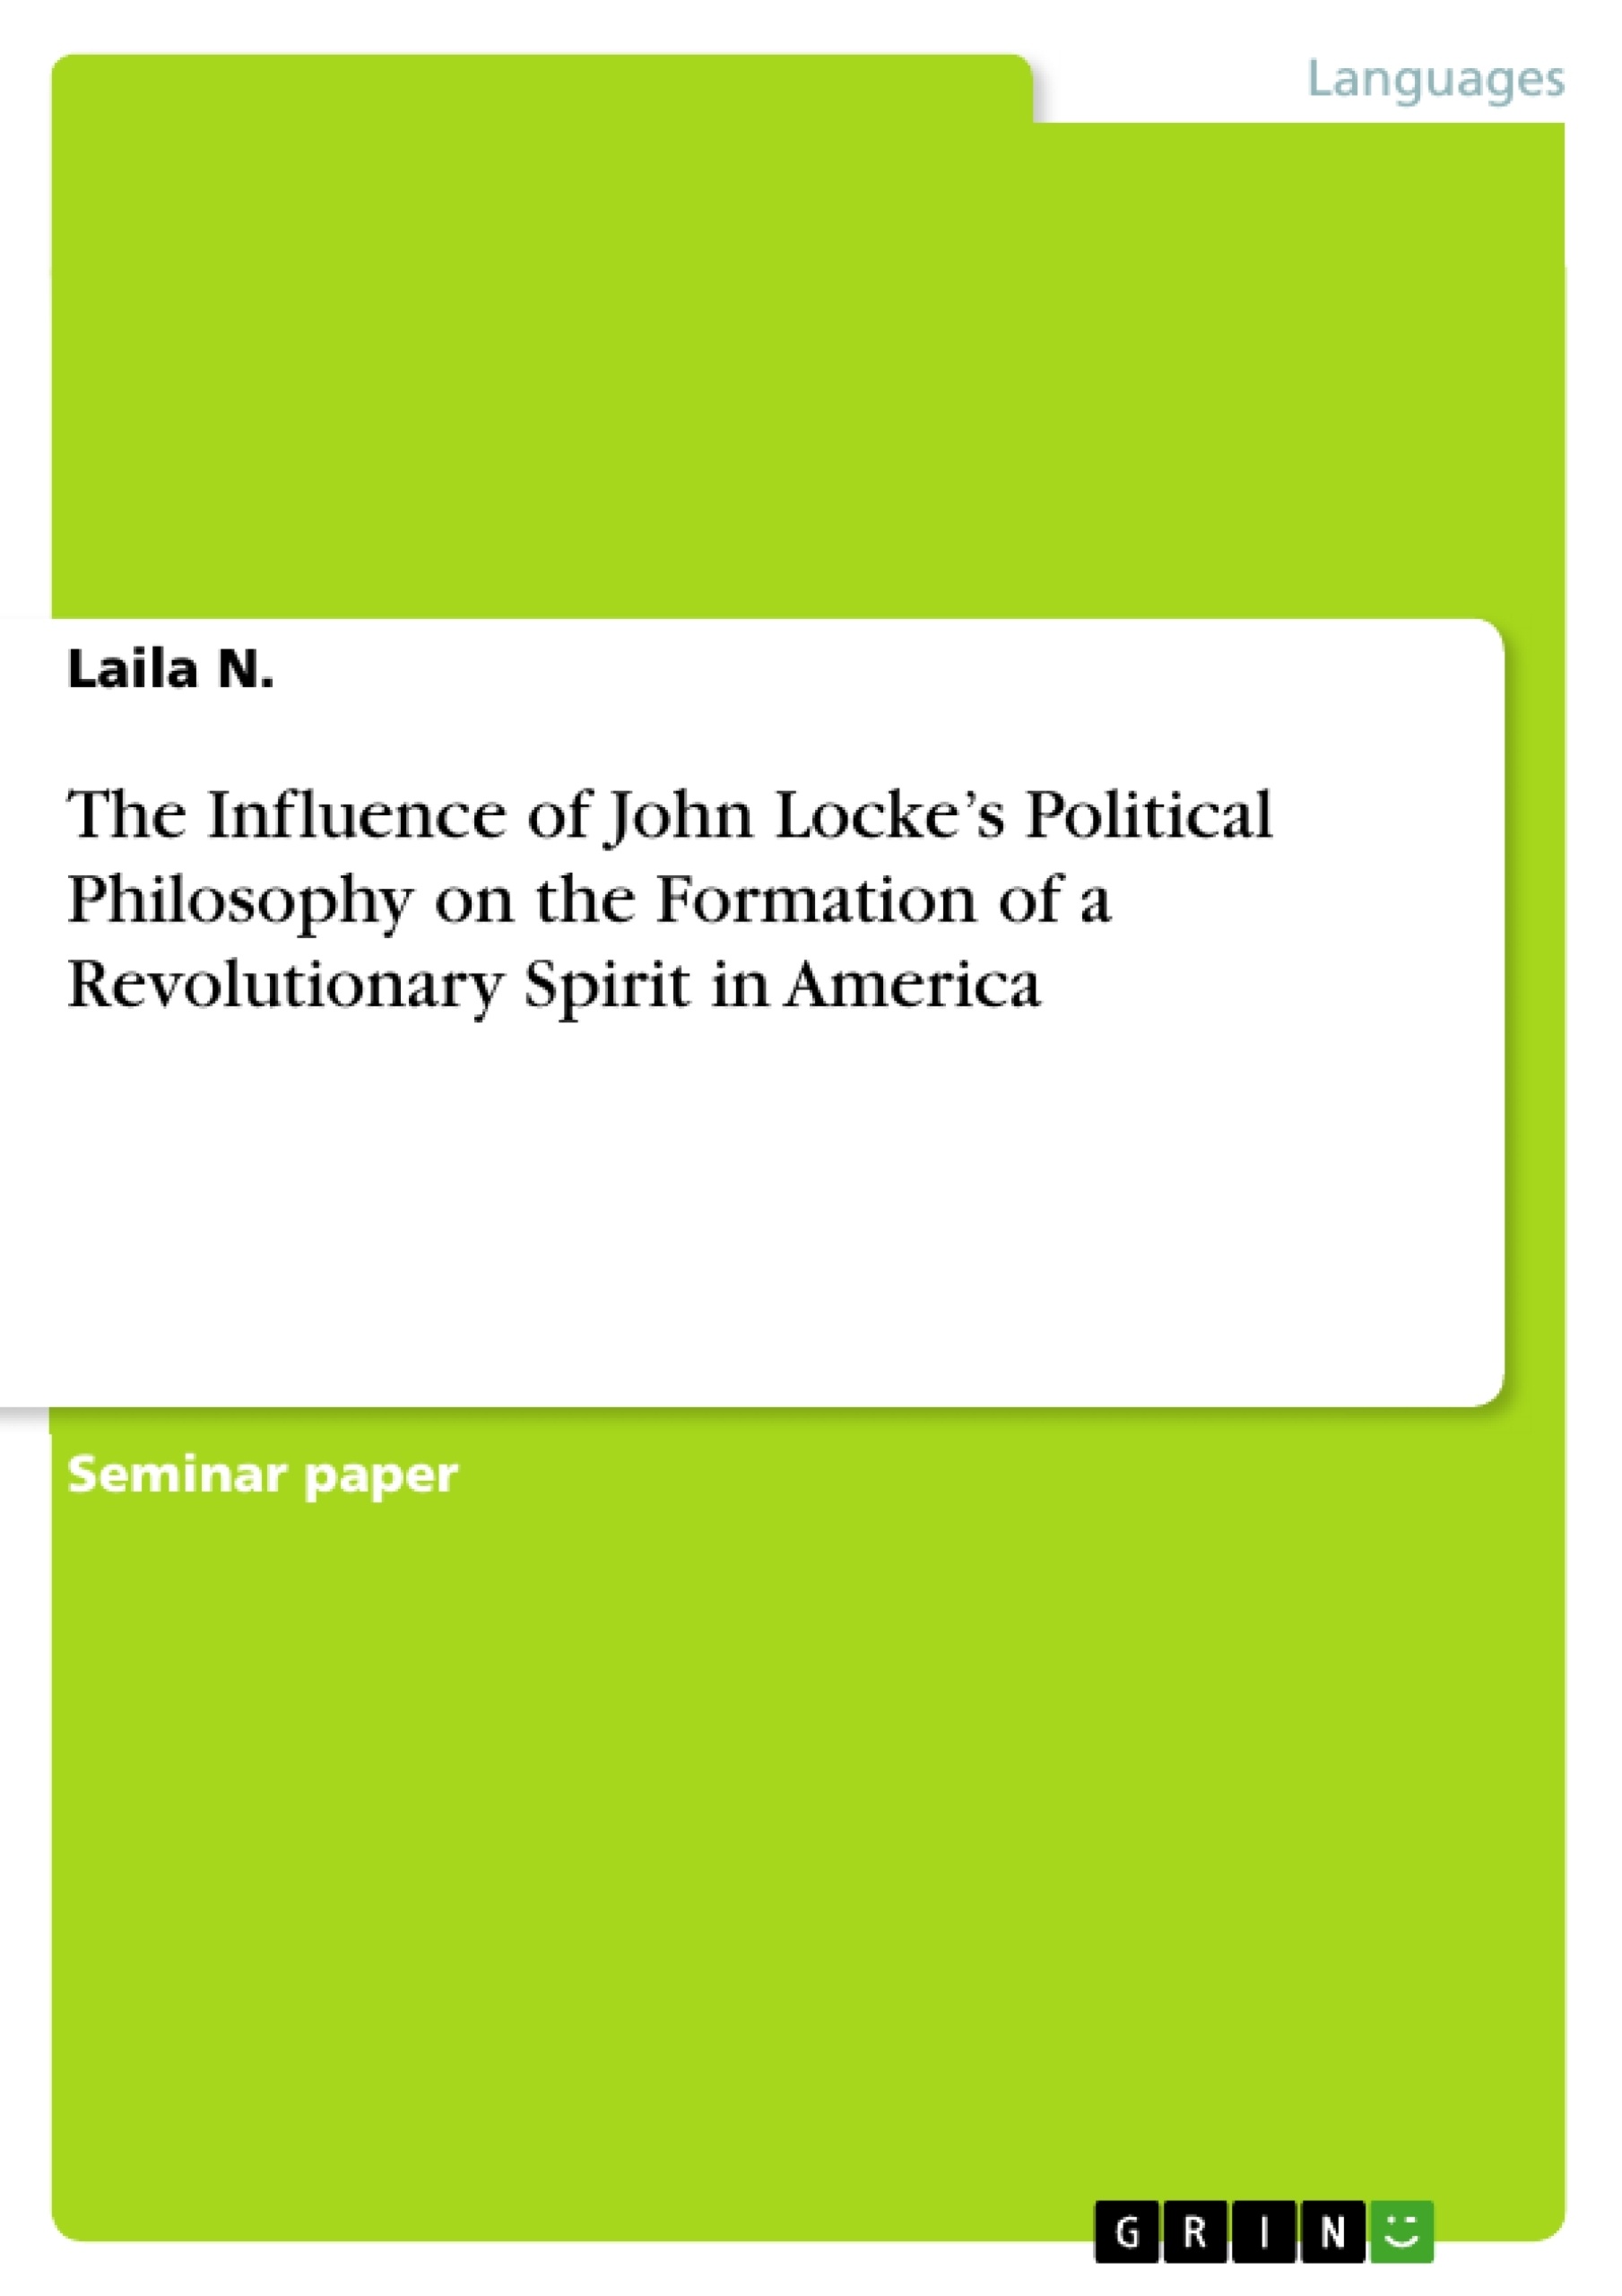 Title: The Influence of John Locke’s Political Philosophy on the Formation of a Revolutionary Spirit in America